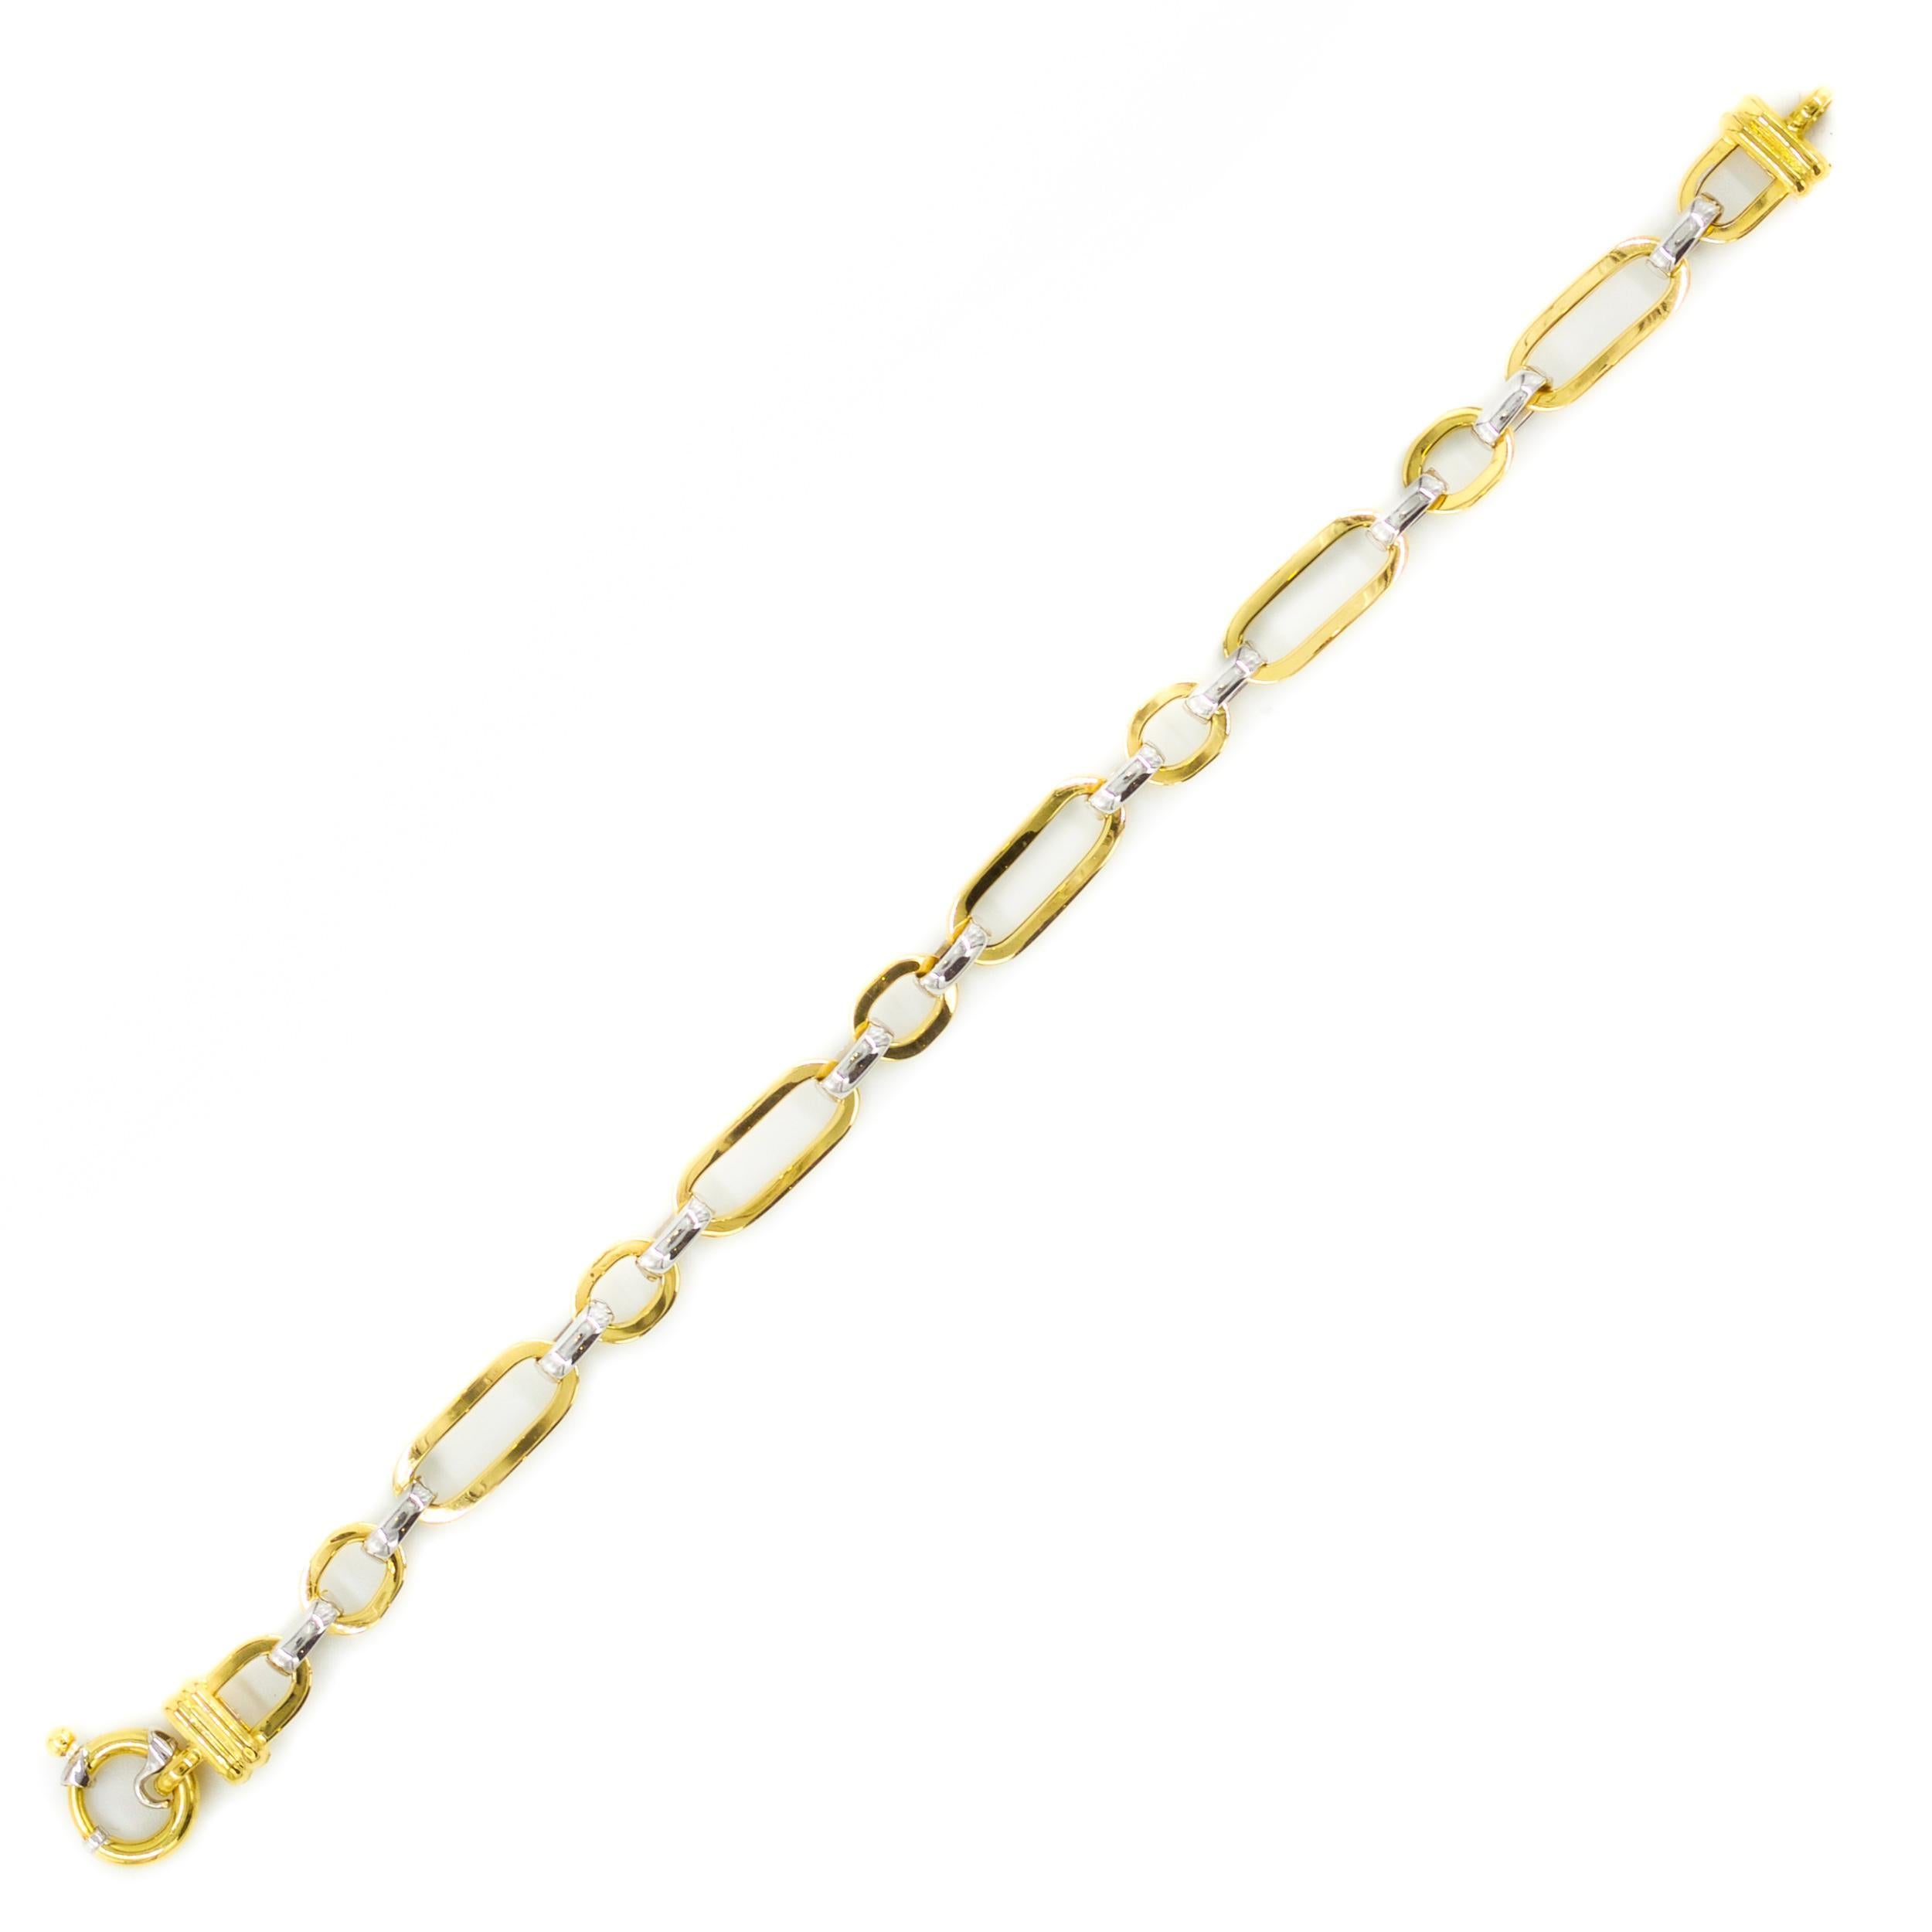 A fun and playful everyday bracelet by OTC, this lovely vintage piece features oval and circular 18 karat yellow gold hollow links attached with high-polish 18 karat white gold hollow circular rings. It locks together with a circular spring-ring